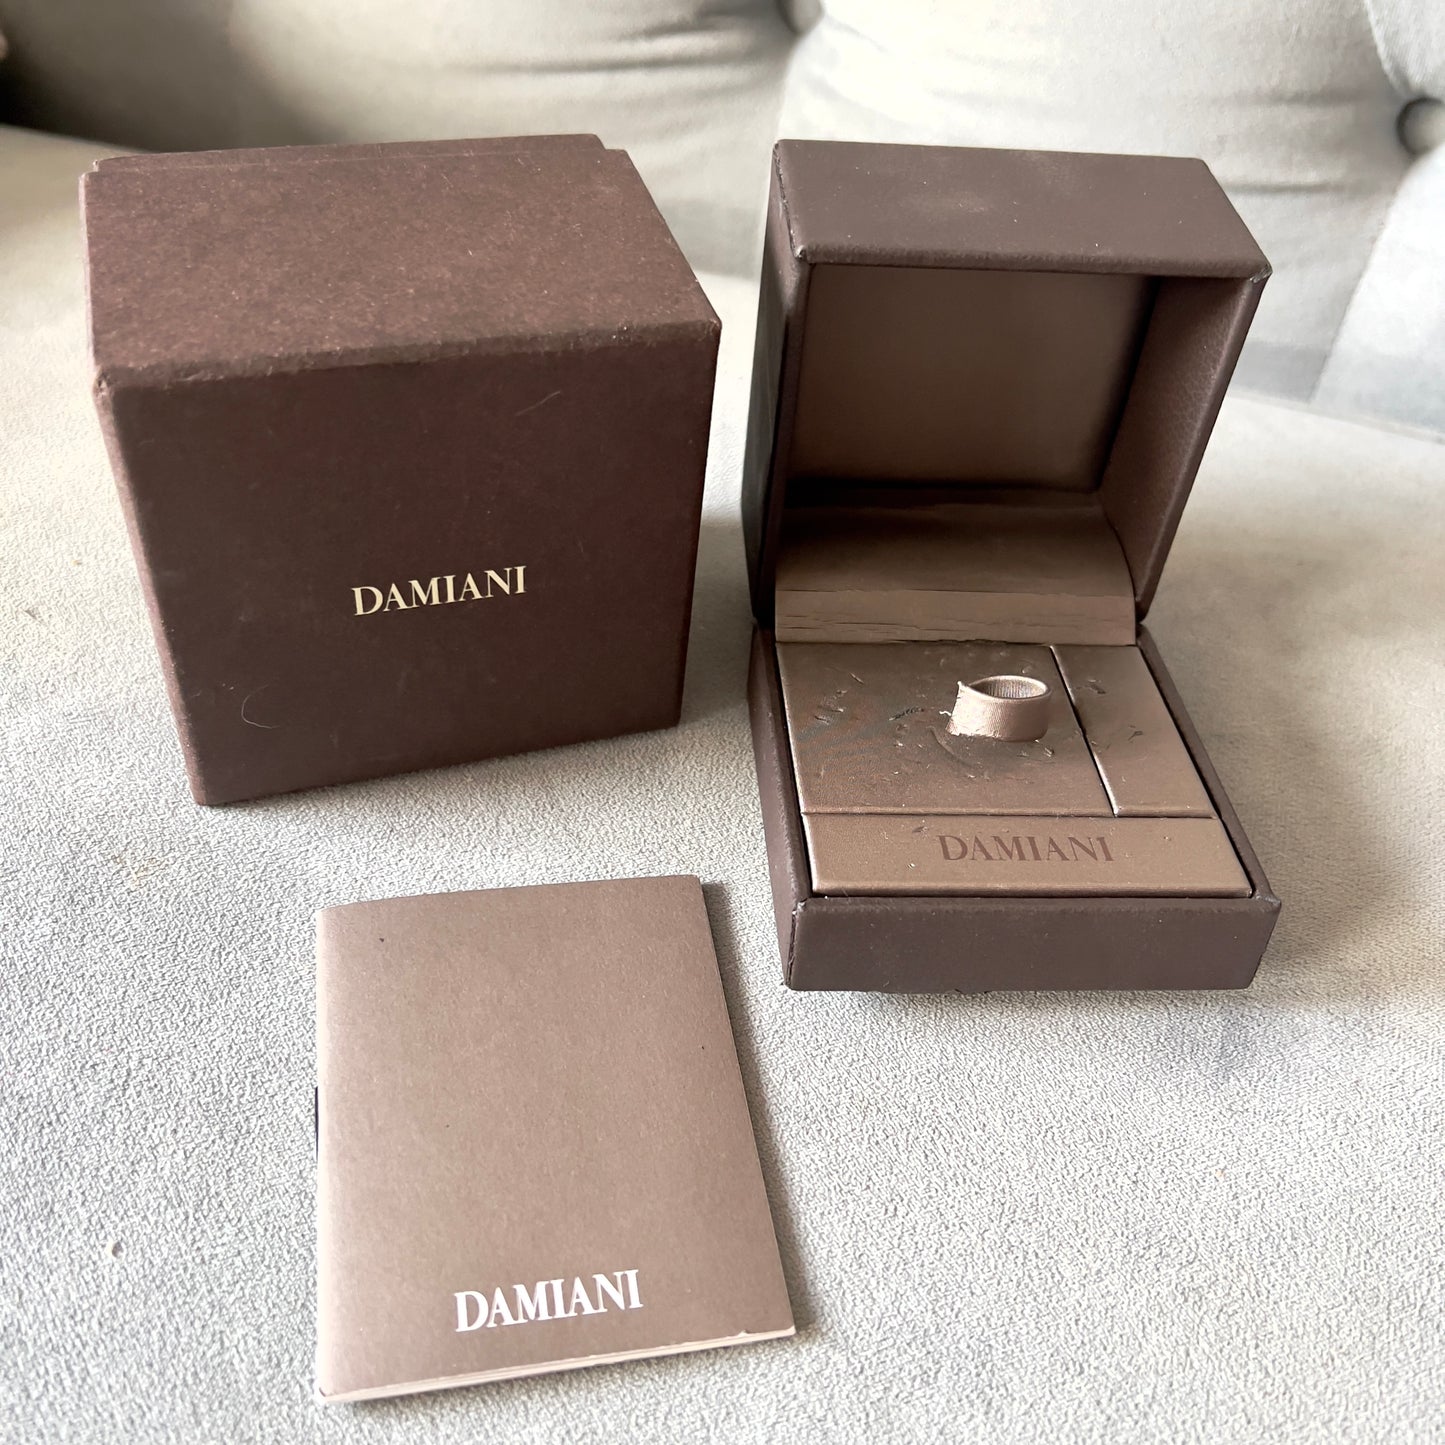 DAMIANI Ring Box + Outer Box + Booklet 3.60x3.60x2.80 inches